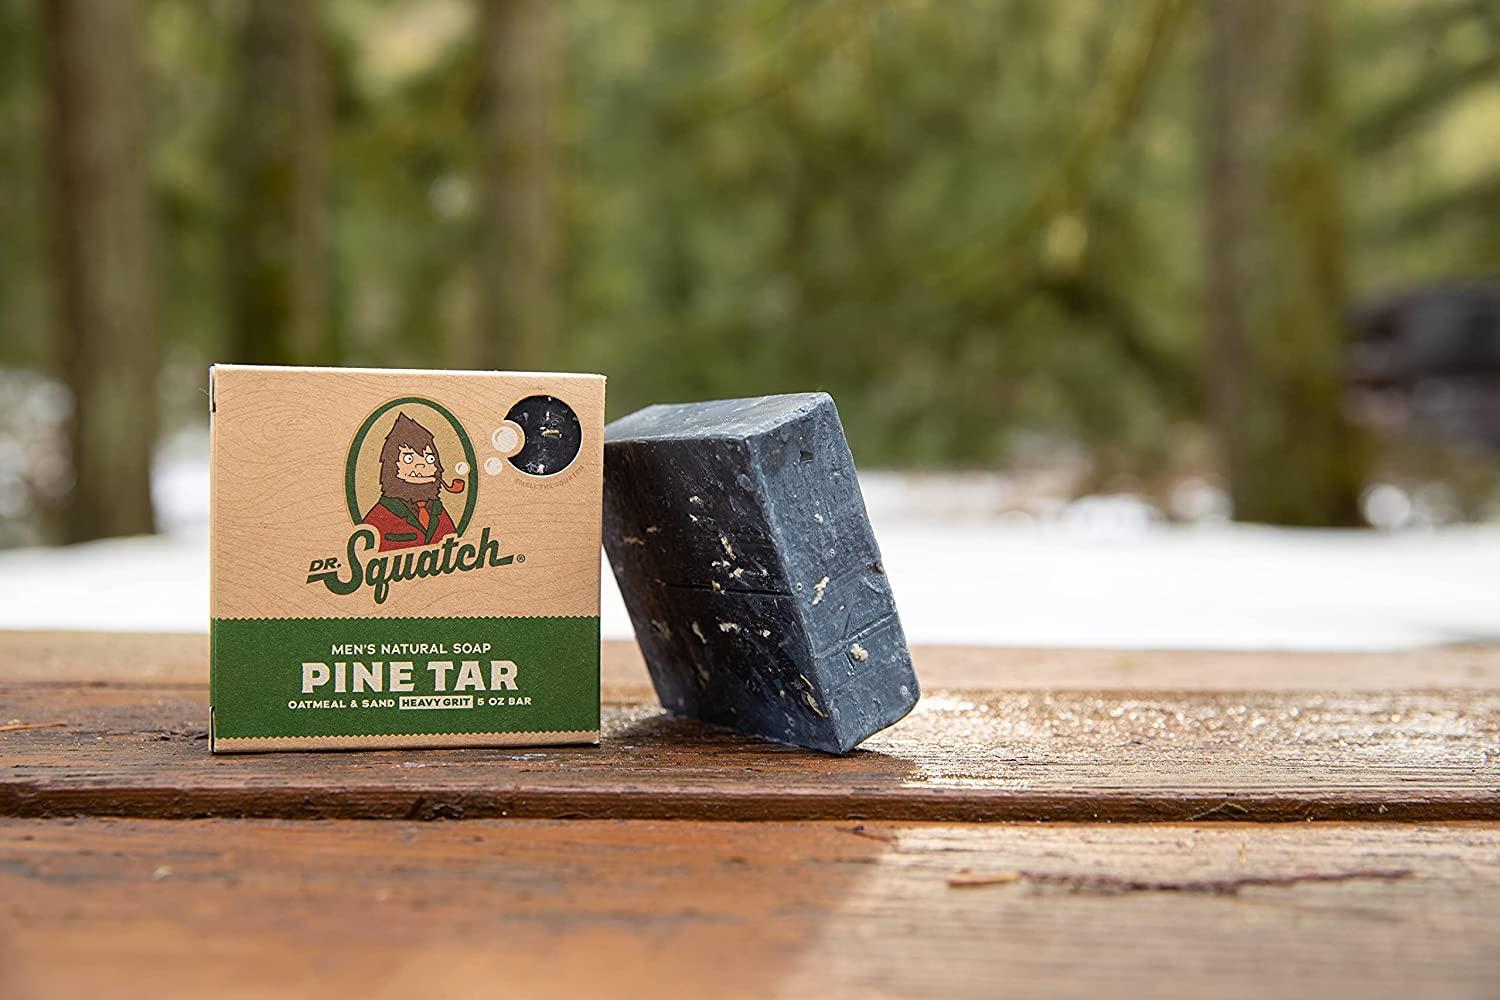 Dr. Squatch Basic Squatch Forest Pack - Pine Tar and Birchwood Breeze -  Handmade Bar Soap With Organic Oils, Soap Gripper and Saver